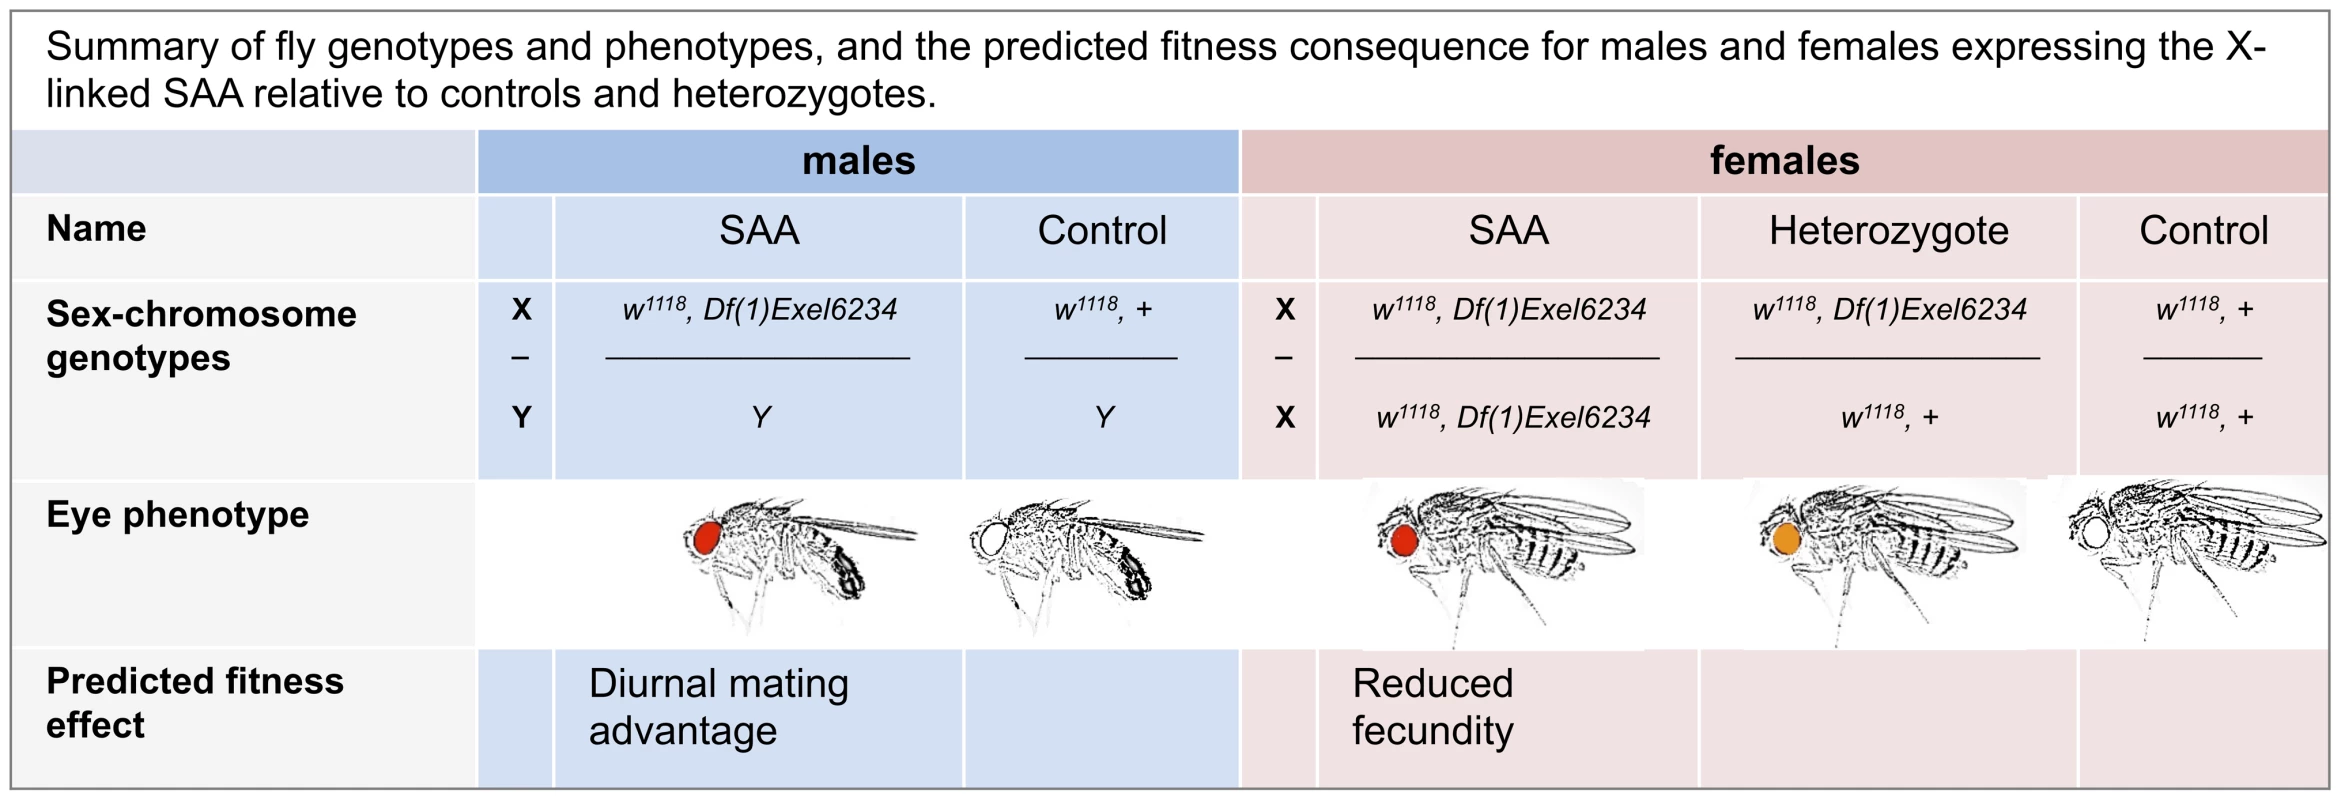 Summary of fly genotypes and phenotypes, and the predicted fitness consequence for males and females expressing the X-linked SAA (sexually antagonistic allele) relative to controls and heterozygotes.